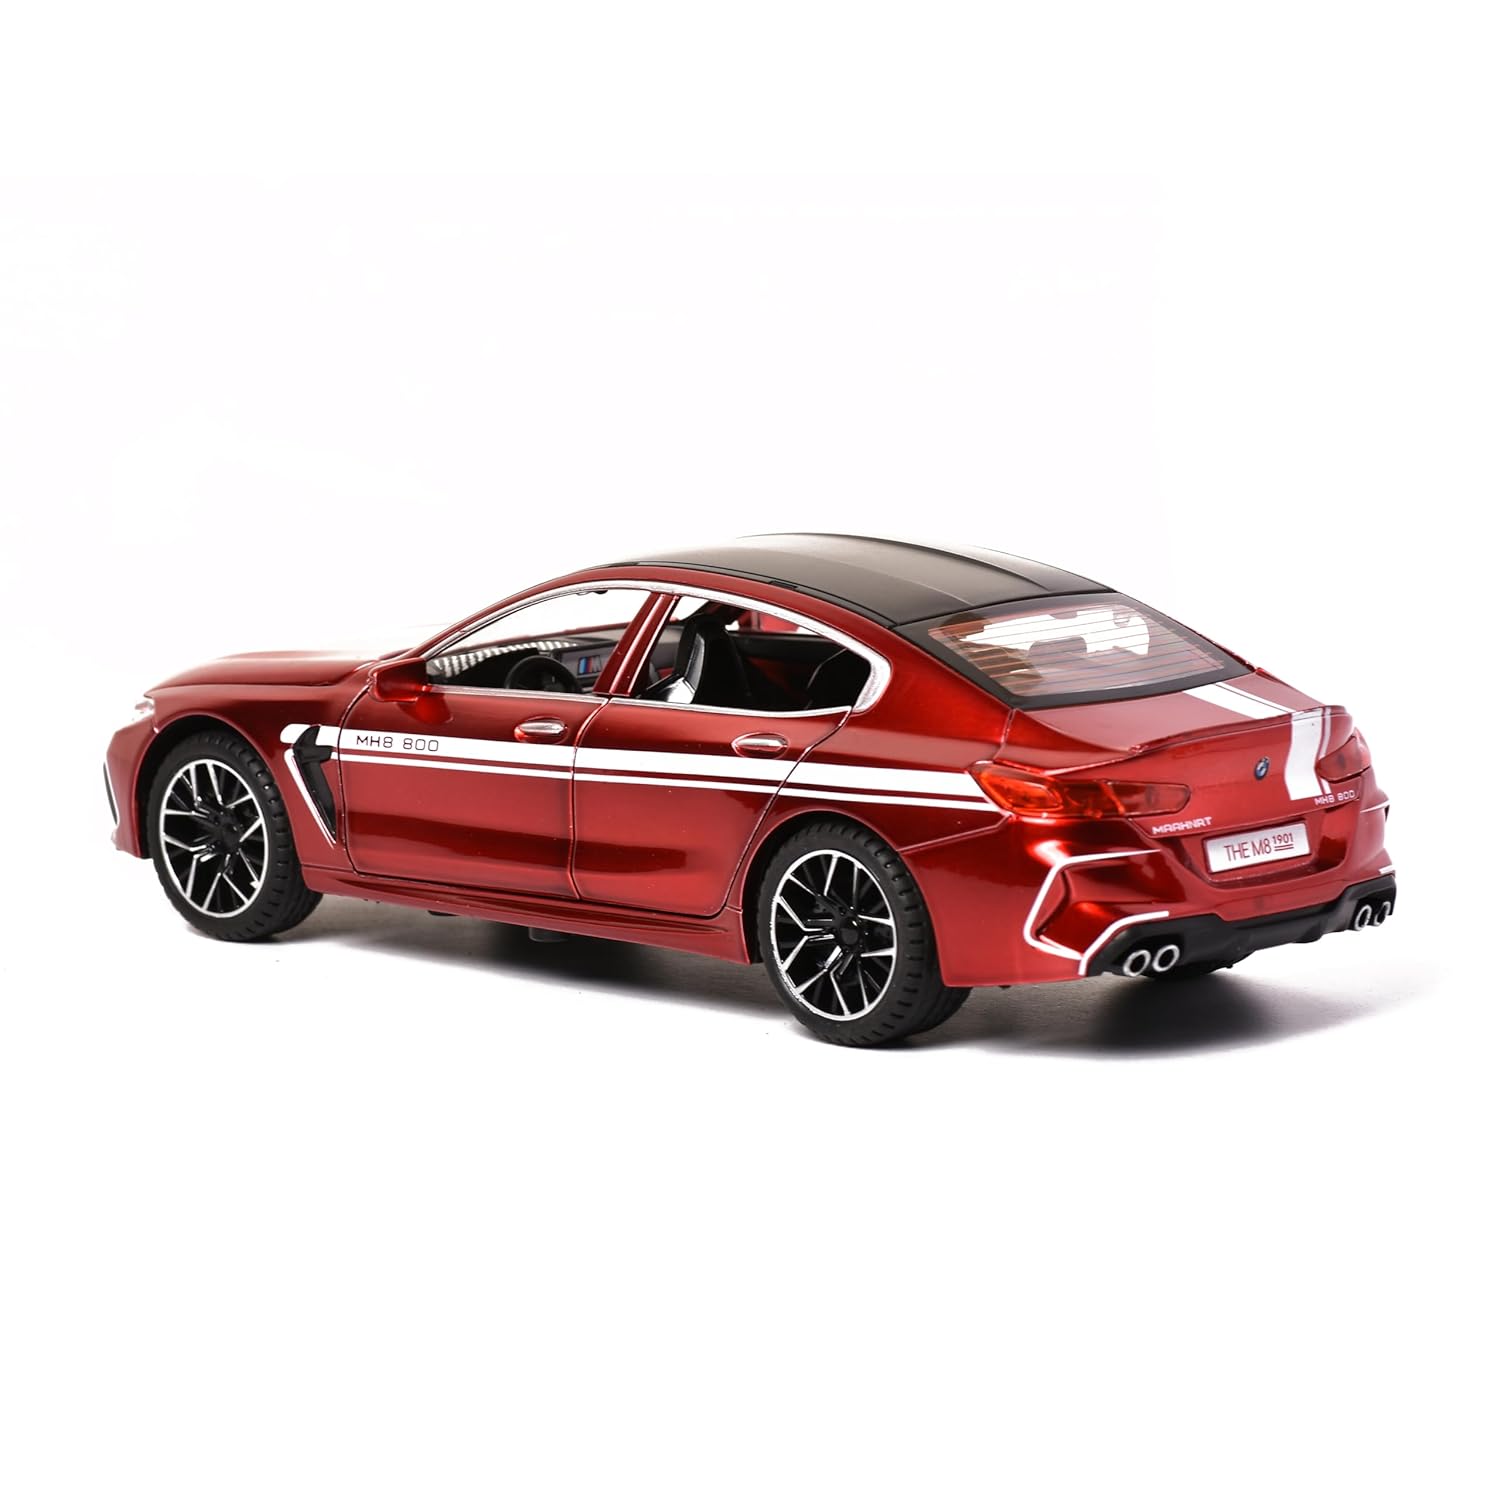 Braintastic Model Diecast Car Toy Vehicle Pull Back Friction Car with Openable Doors Light & Music Toys for Kids Age 3+ Years (BMW Red)